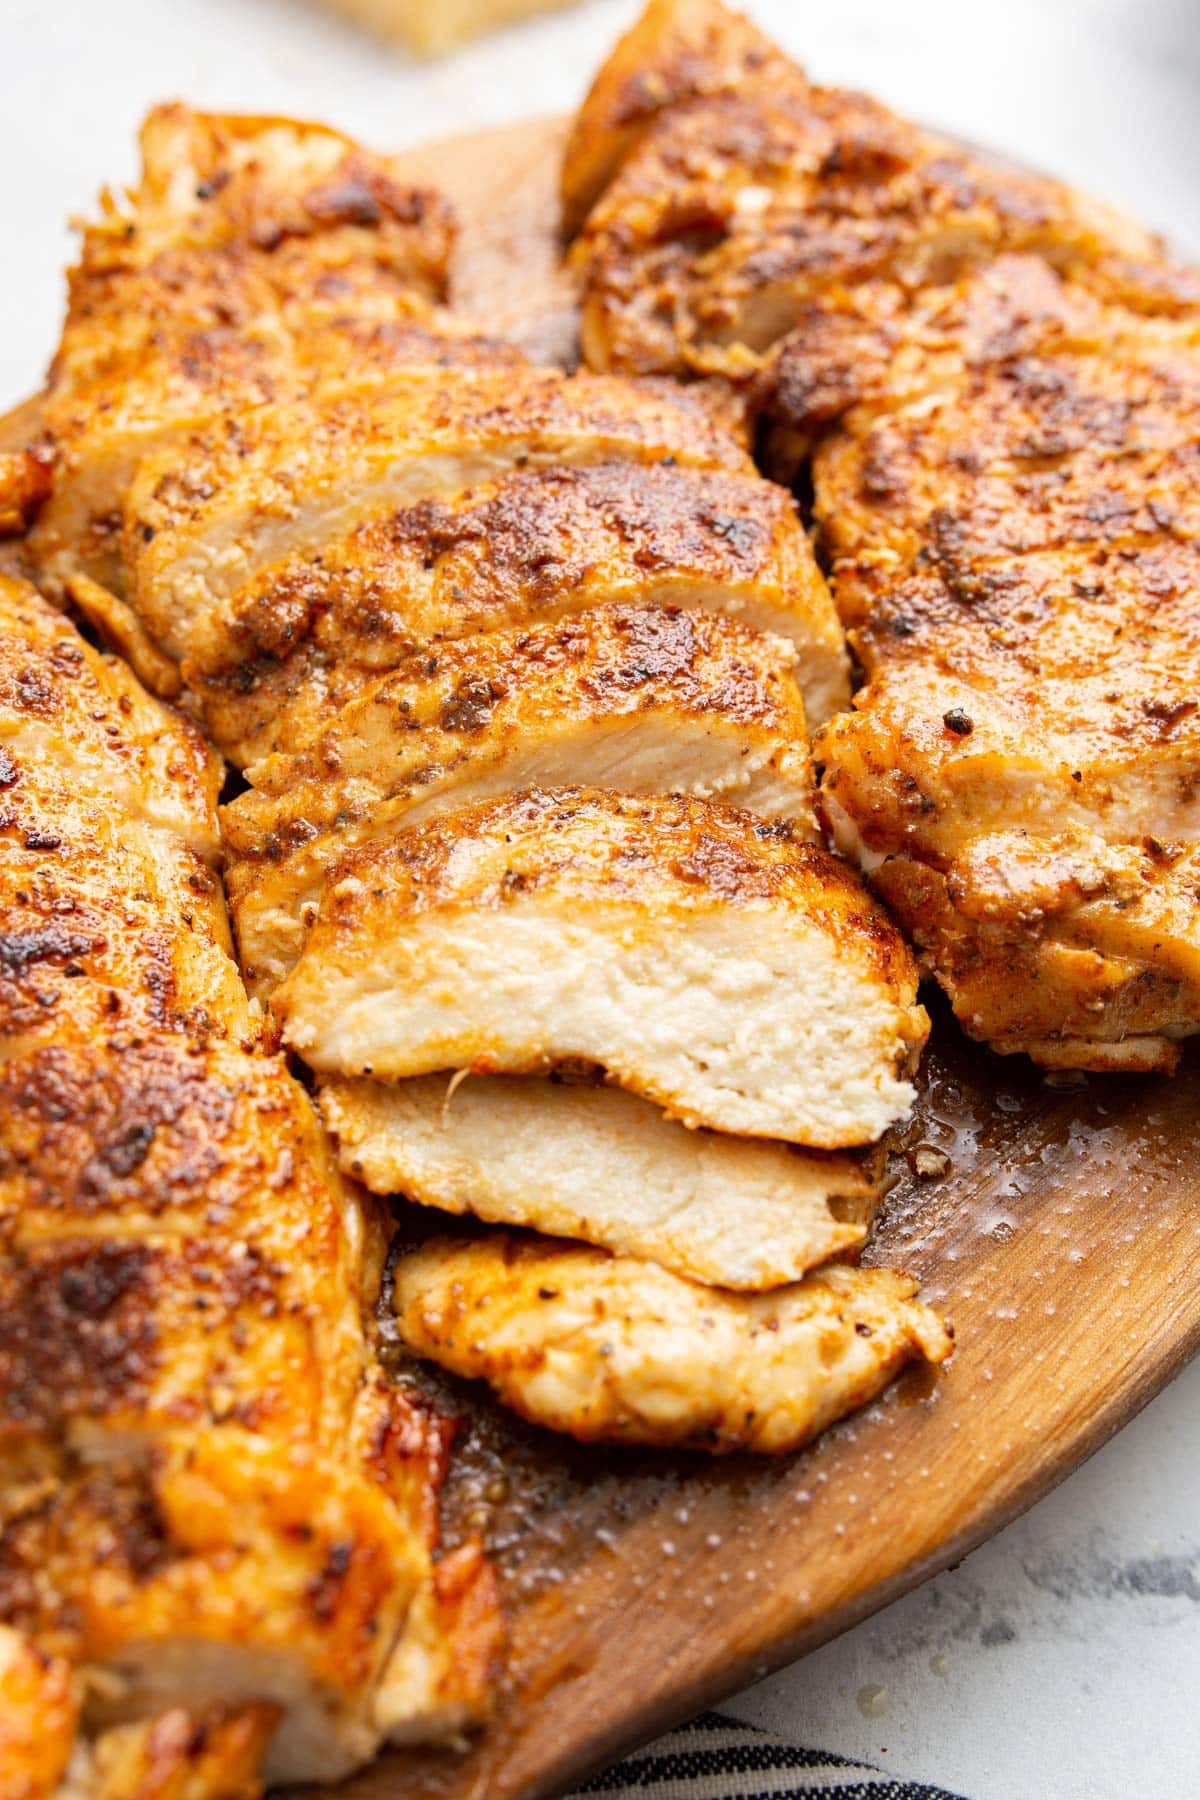 Thick slices of seared Cajun seasoned chicken on a cutting board.